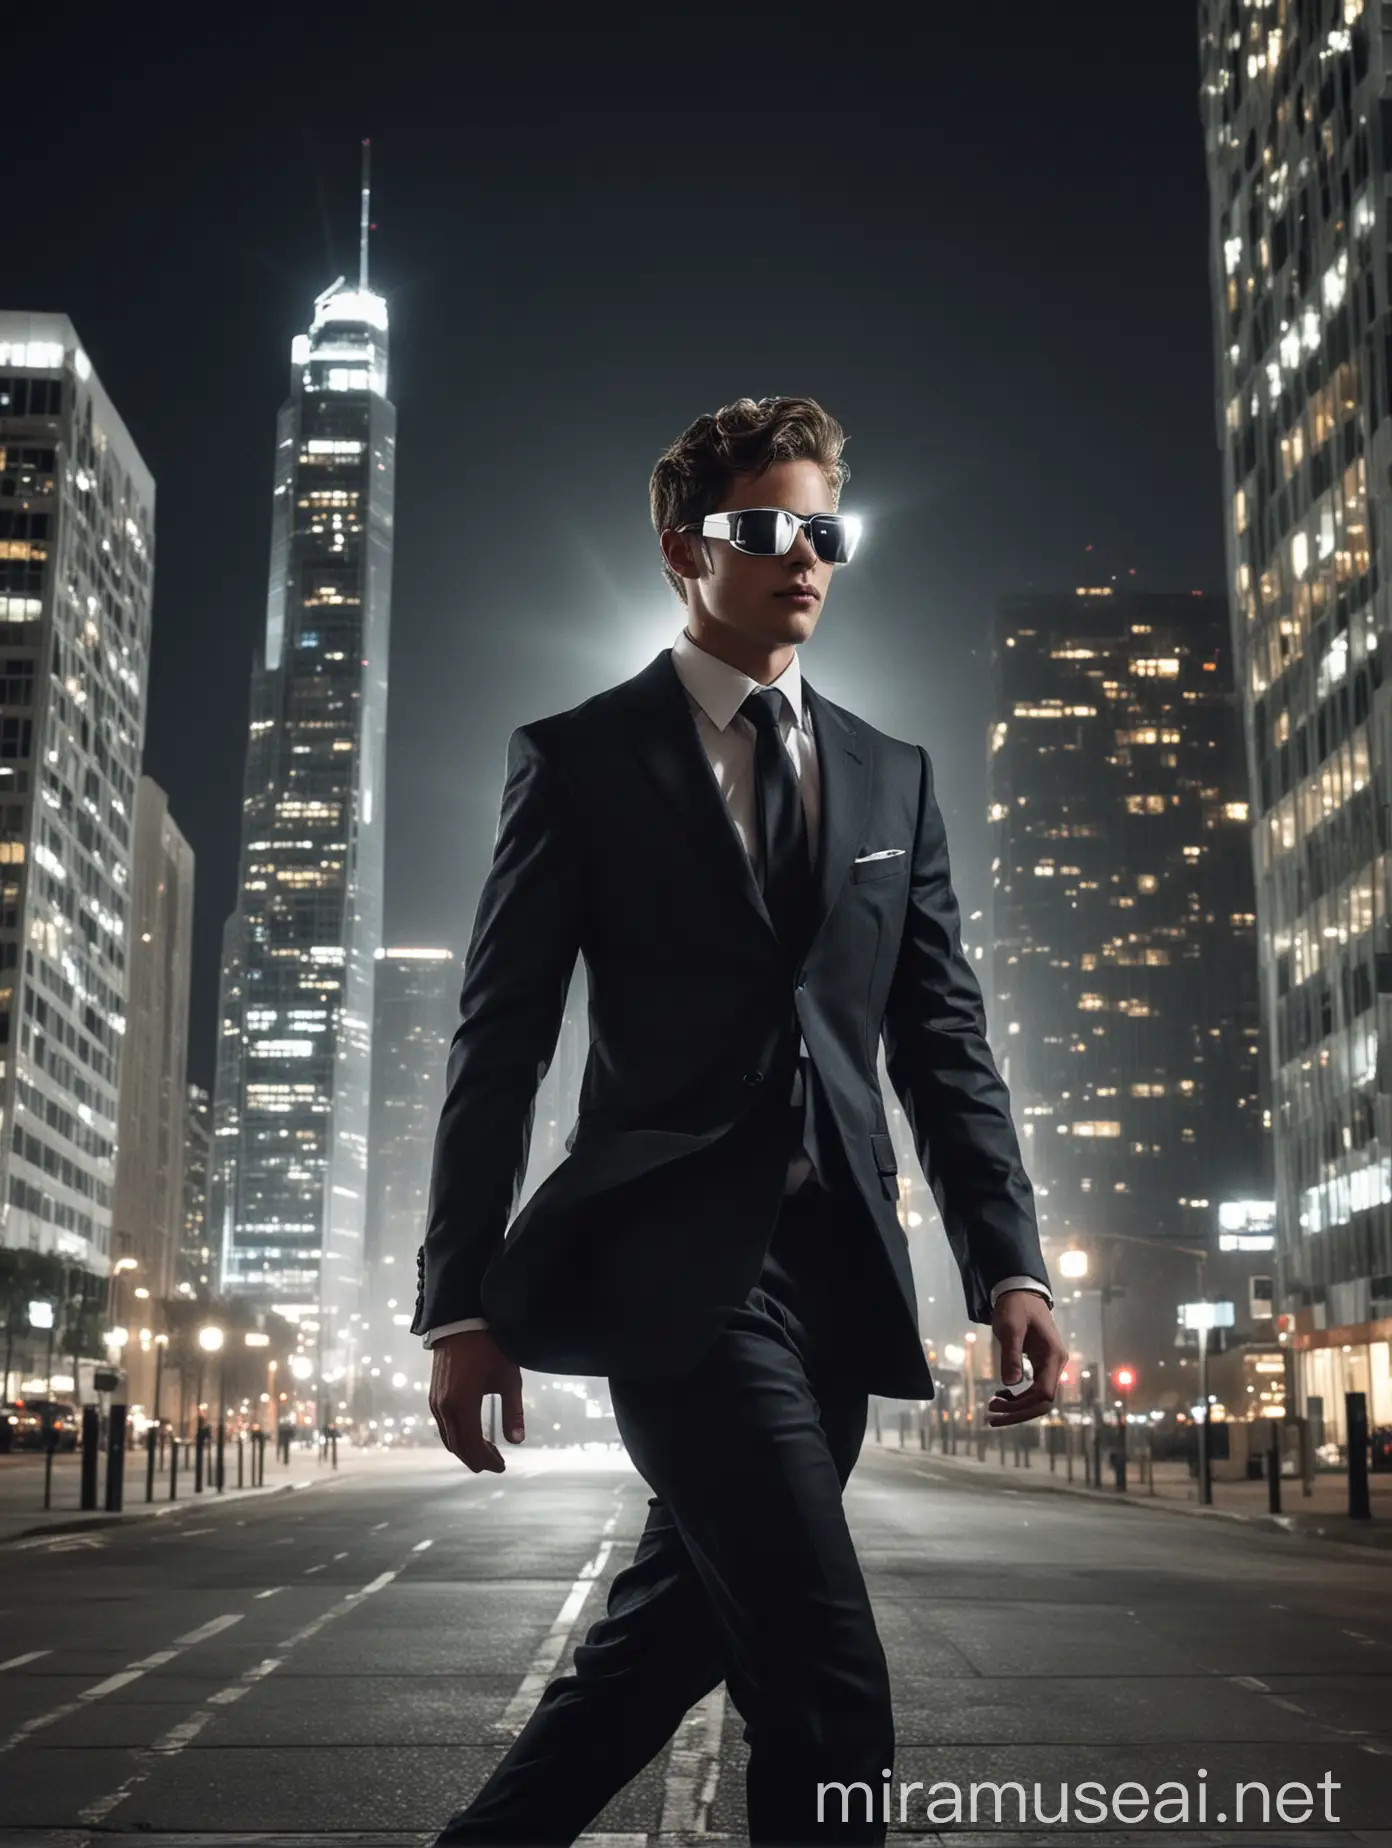 Stylish Young Man in Suit Walking by Glowing Skyscraper at Night